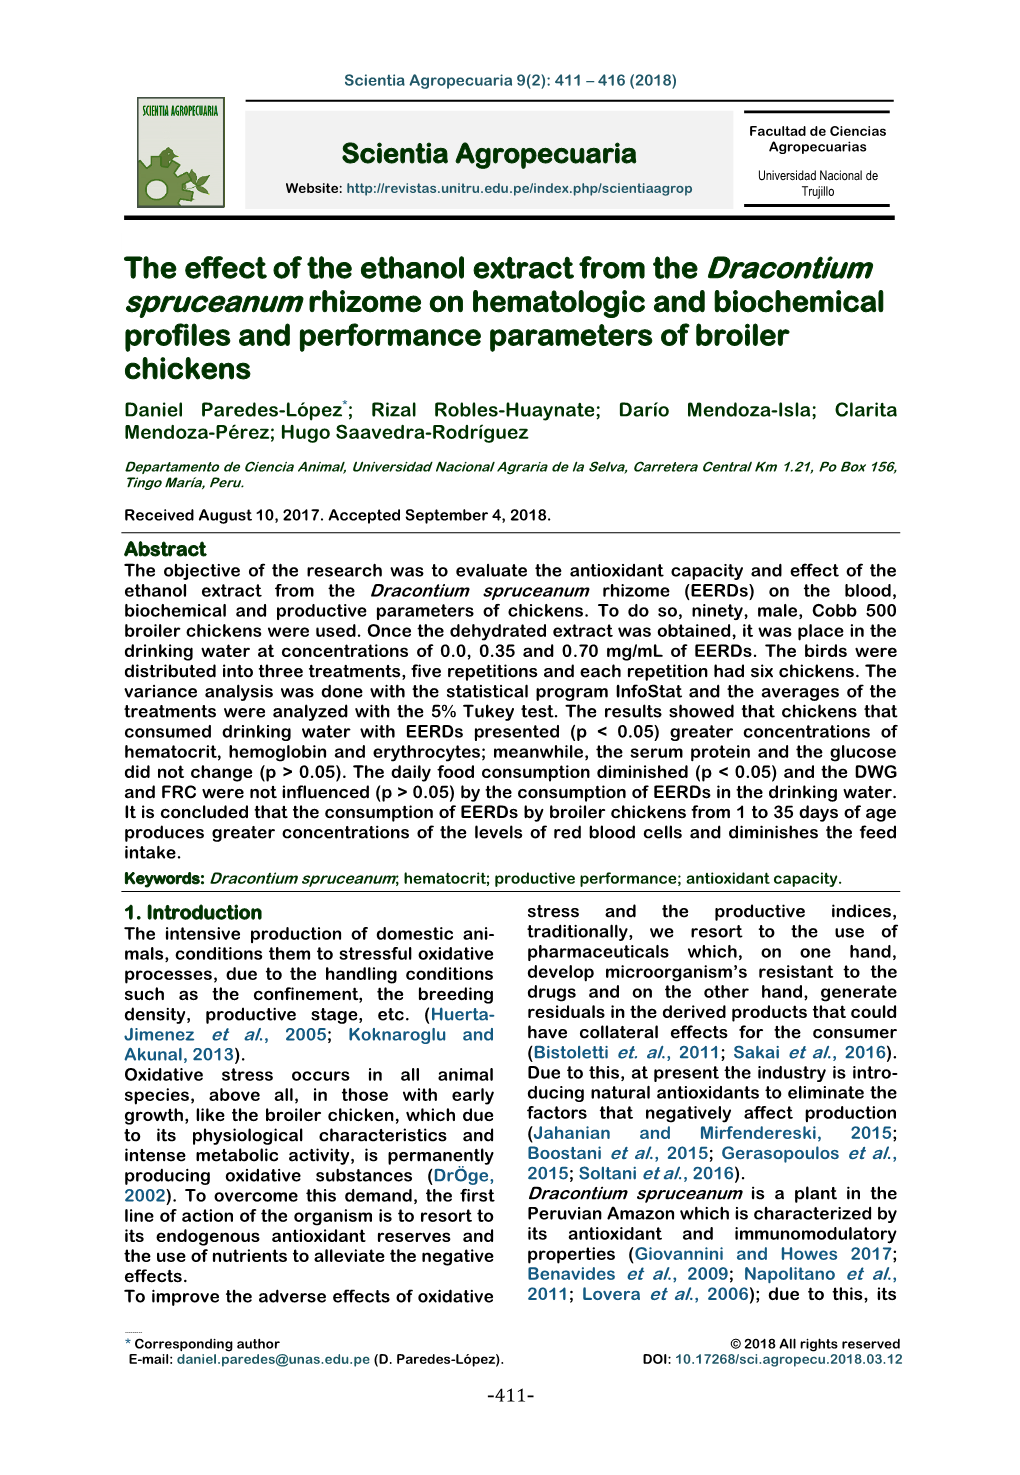 The Effect of the Ethanol Extract from the Dracontium Spruceanum Rhizome on Hematologic and Biochemical Profiles and Performance Parameters of Broiler Chickens